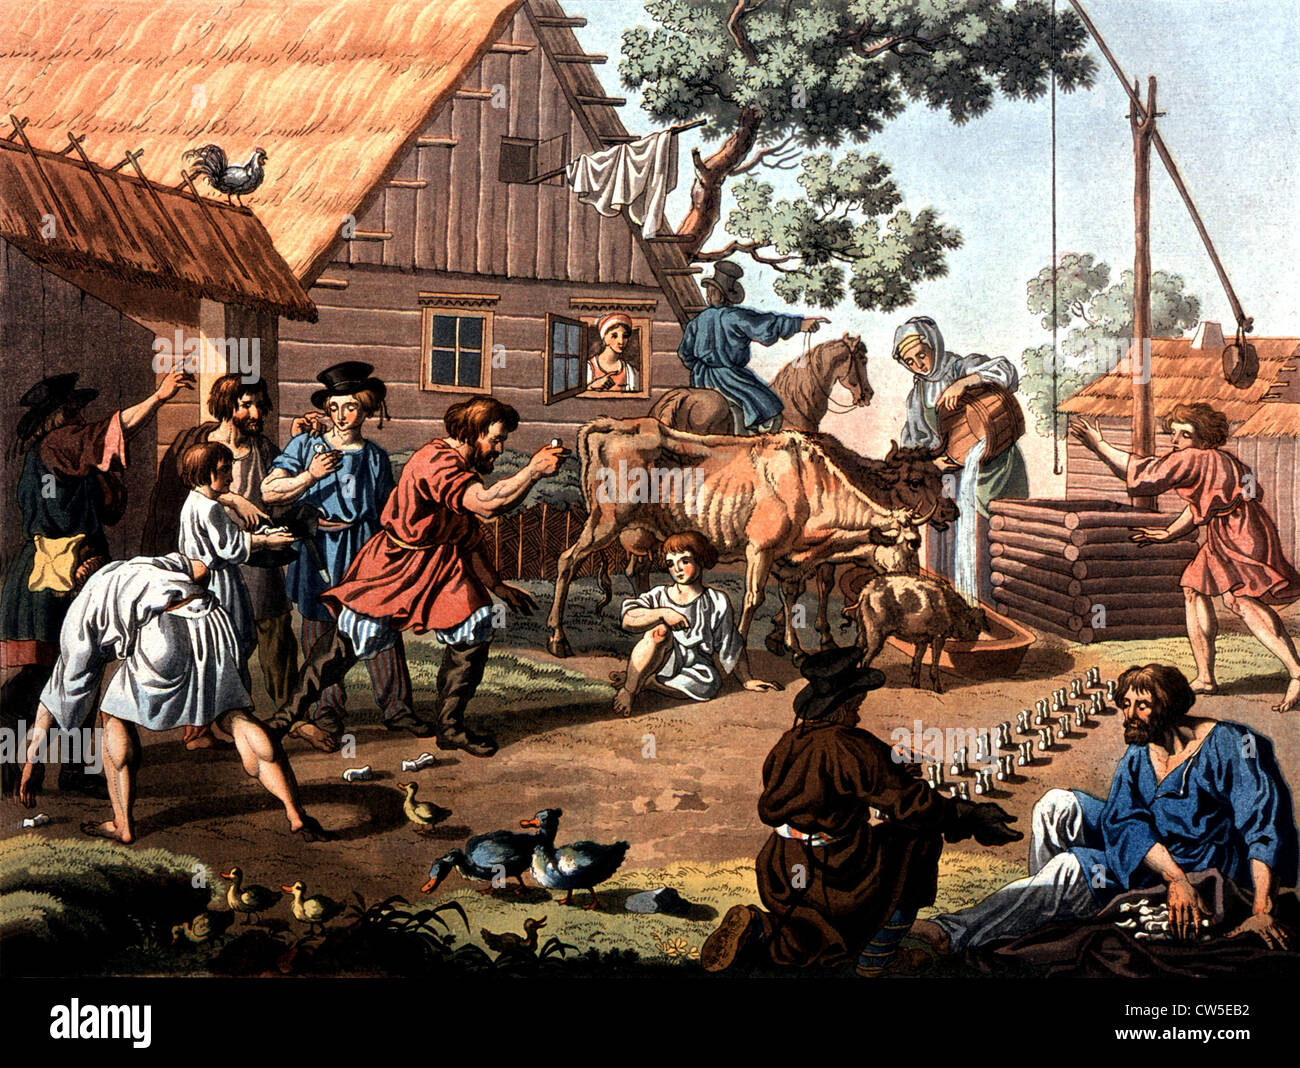 Colored engraving. Game of jacks Stock Photo